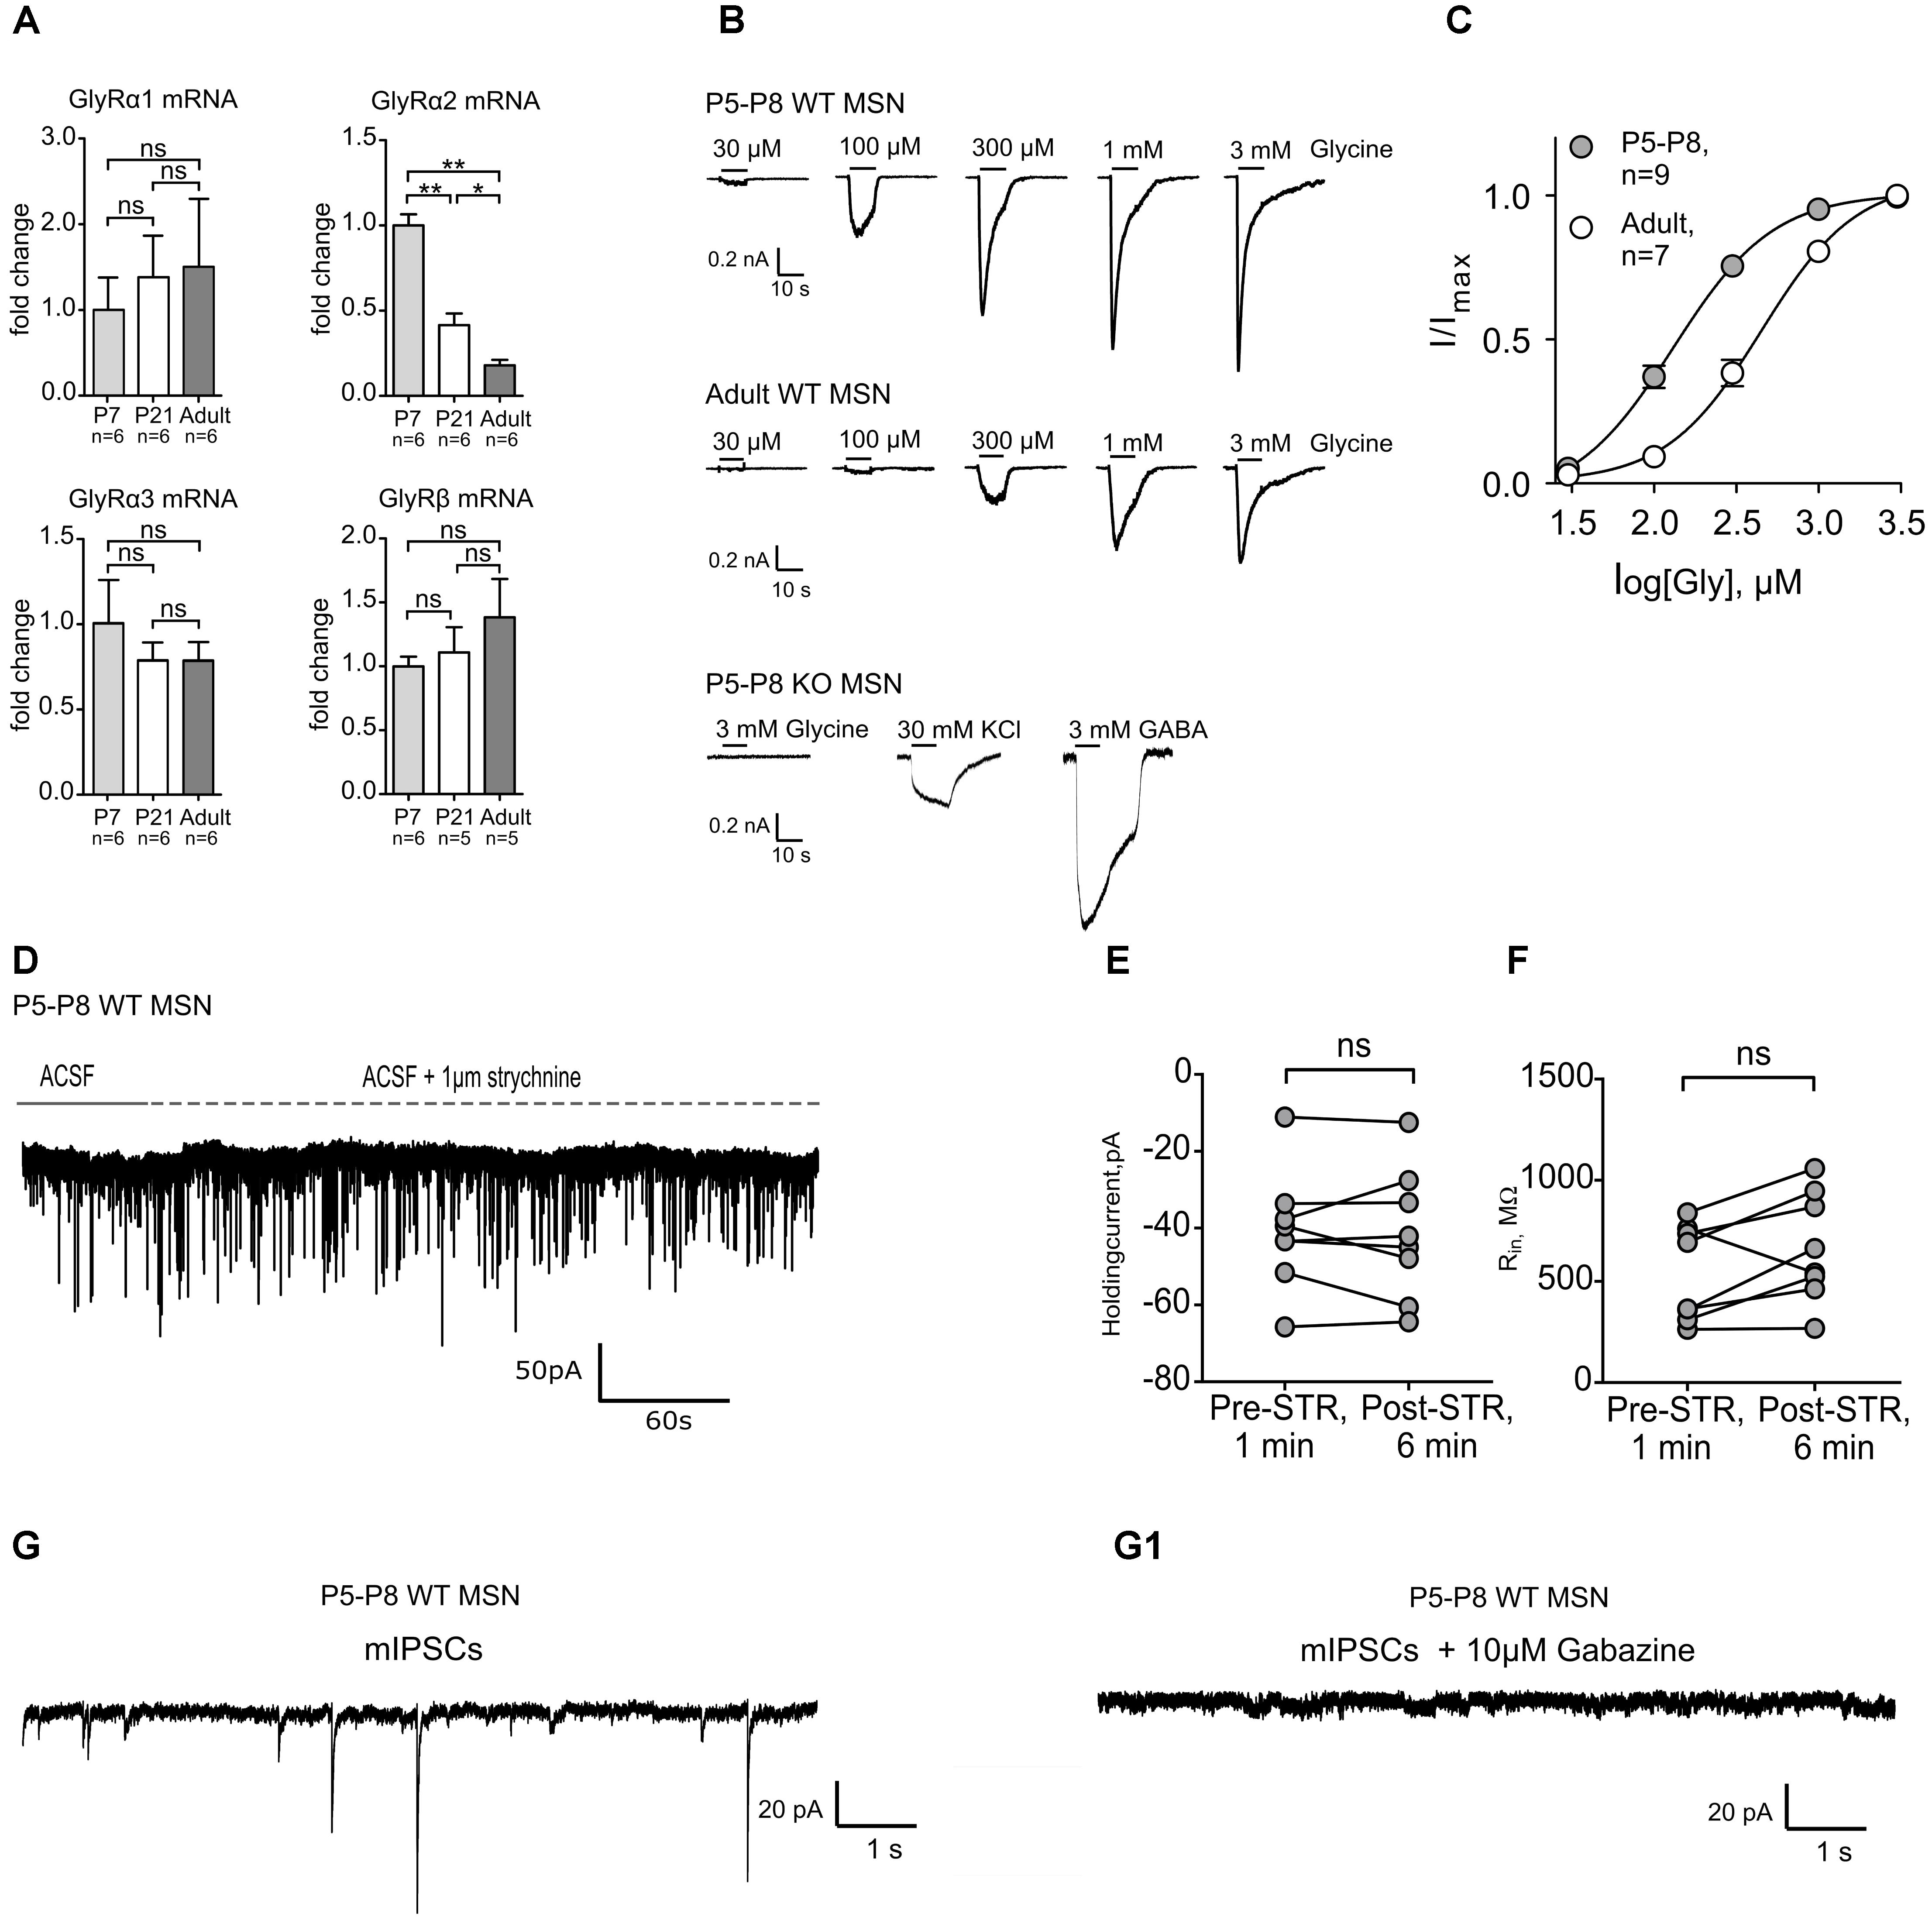 Frontiers Alpha2 Containing Glycine Receptors Promote Neonatal Spontaneous Activity Of Striatal Medium Spiny Neurons And Support Maturation Of Glutamatergic Inputs Molecular Neuroscience